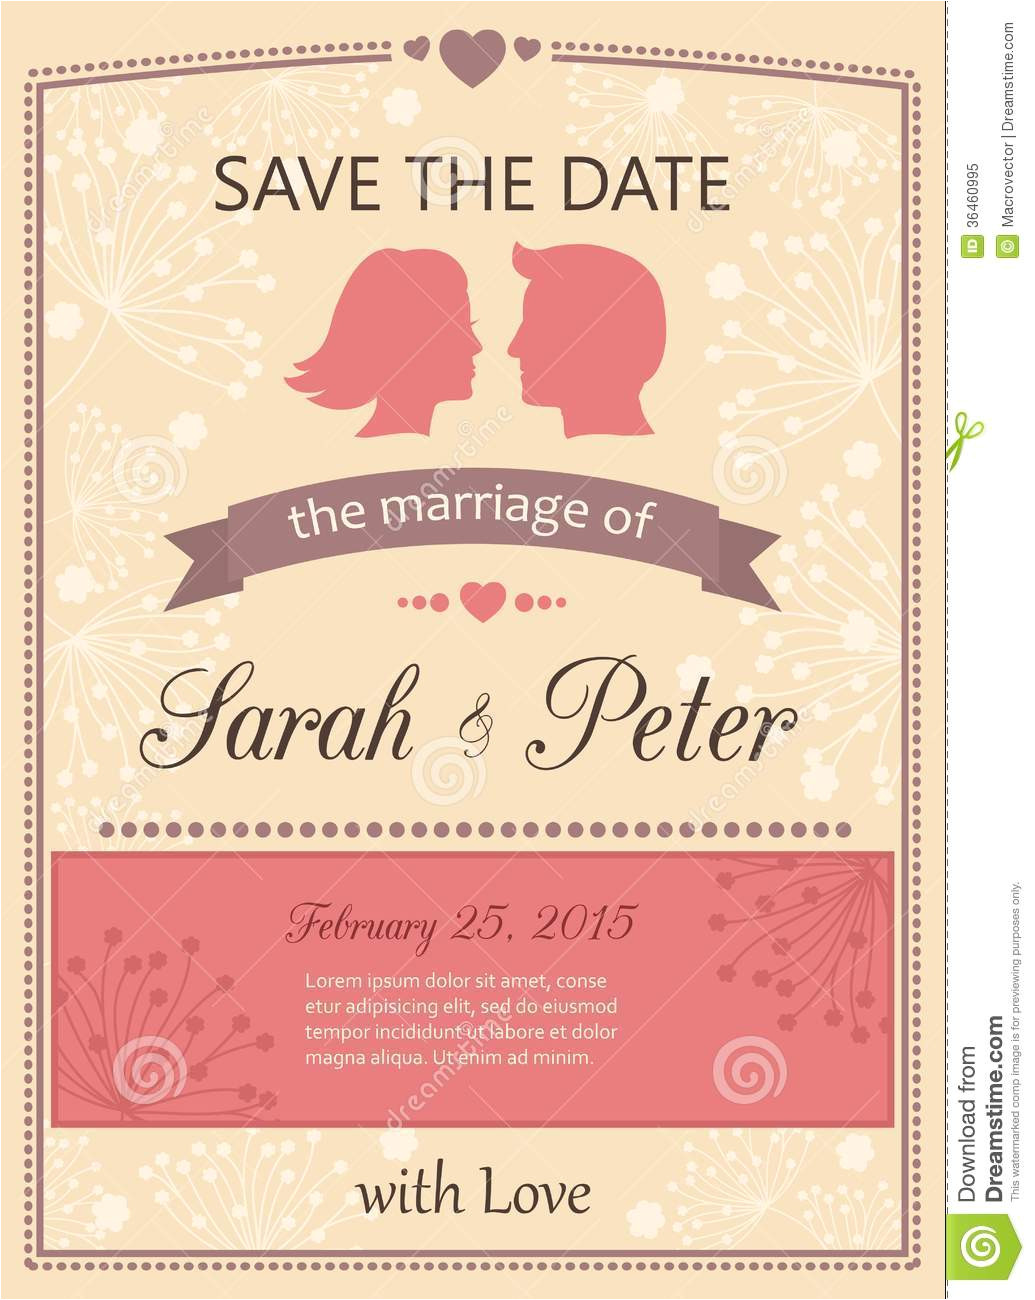 royalty free stock photo save date wedding invitation card template vector illustration image36460995